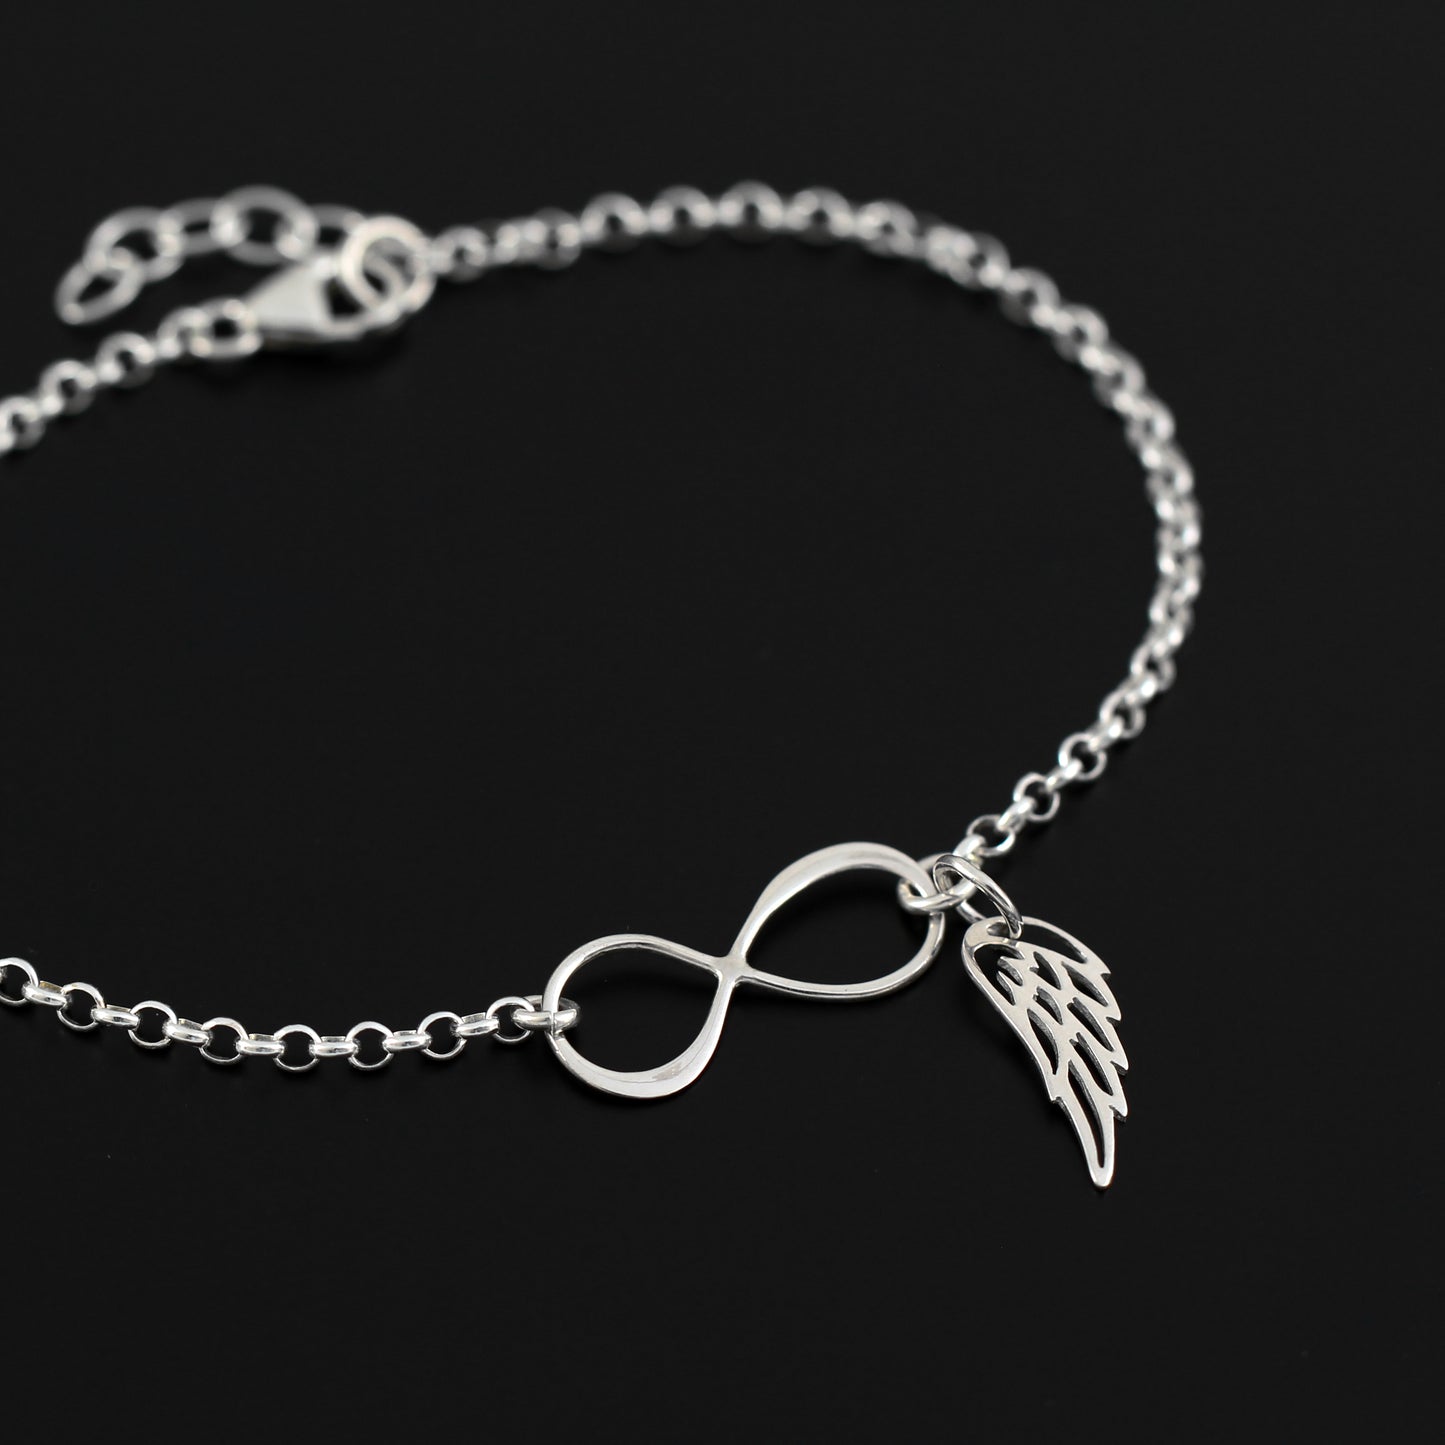 Loss of Loved One Gift for Women • Bracelet • Infinity and Angel Wing Charm • Memorial Remembrance Gift • Sorry For Your Loss Bracelet • In Memory of Husband Mother Father Miscarriage